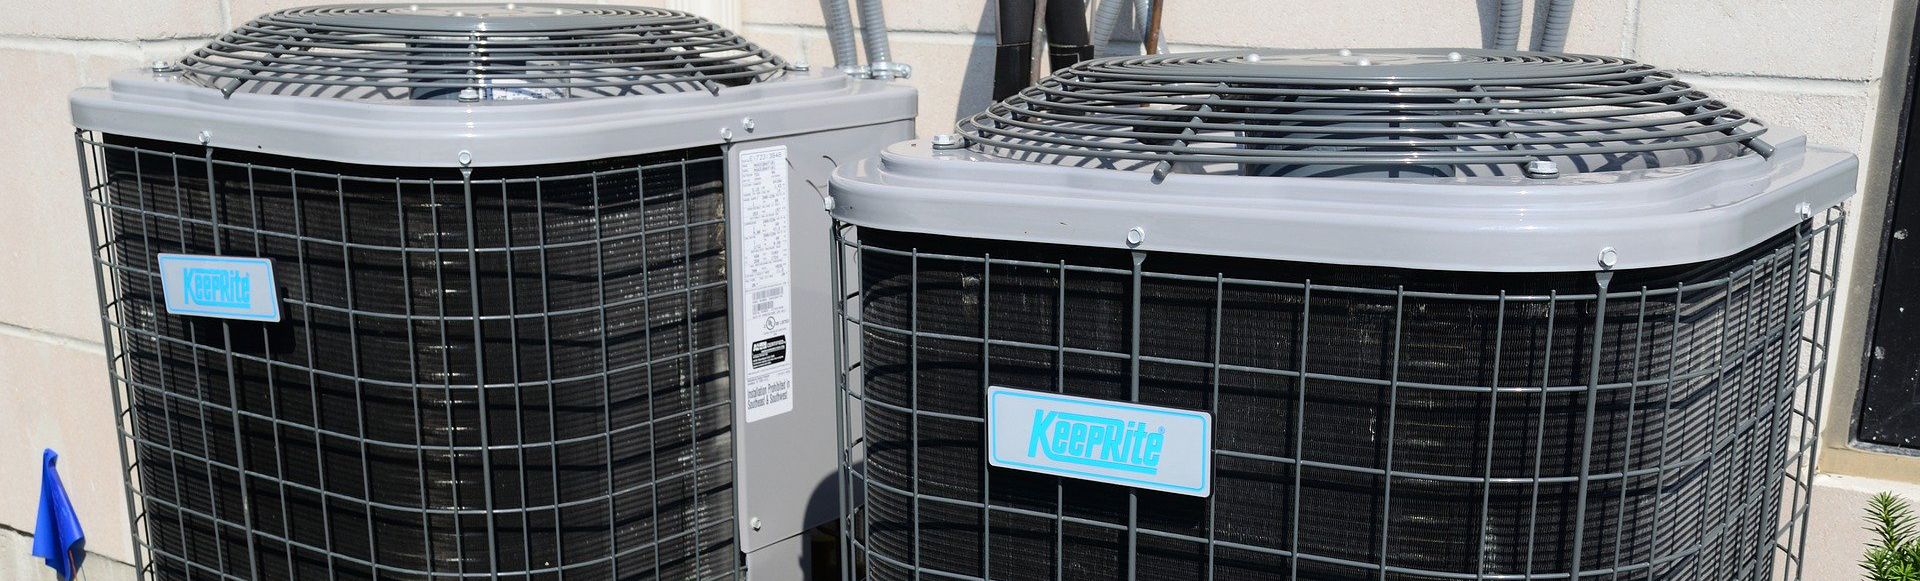 HomeServe Expands HVAC Presence in Arizona with Acquisition of Sure Temp